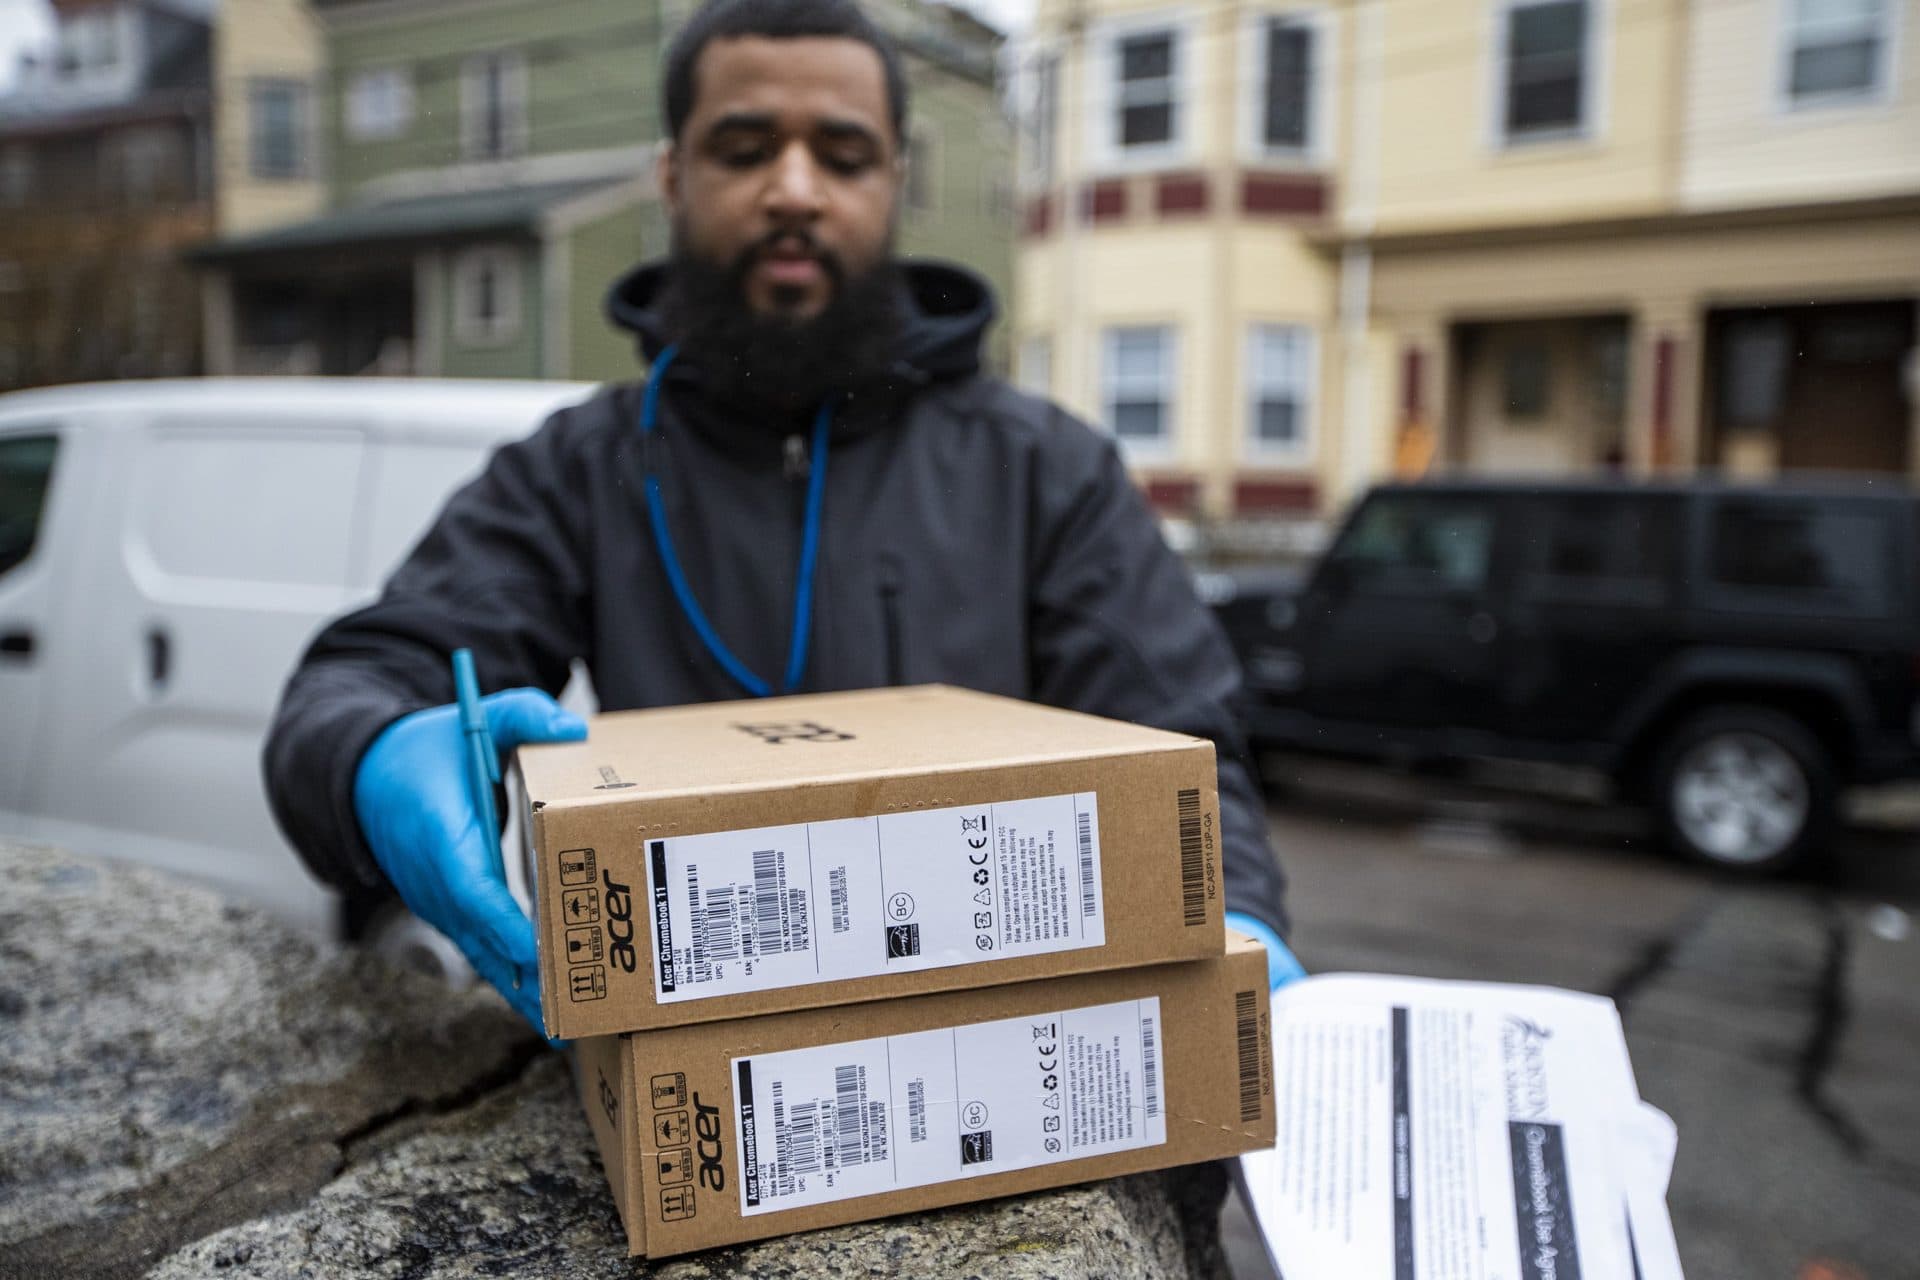 March 19: Giscar Centeio prepares to deliver two Chromebooks to Boston Public Schools students living in Roxbury, after Mayor Marty Walsh announced the city would move to remote learning. (Jesse Costa/WBUR)